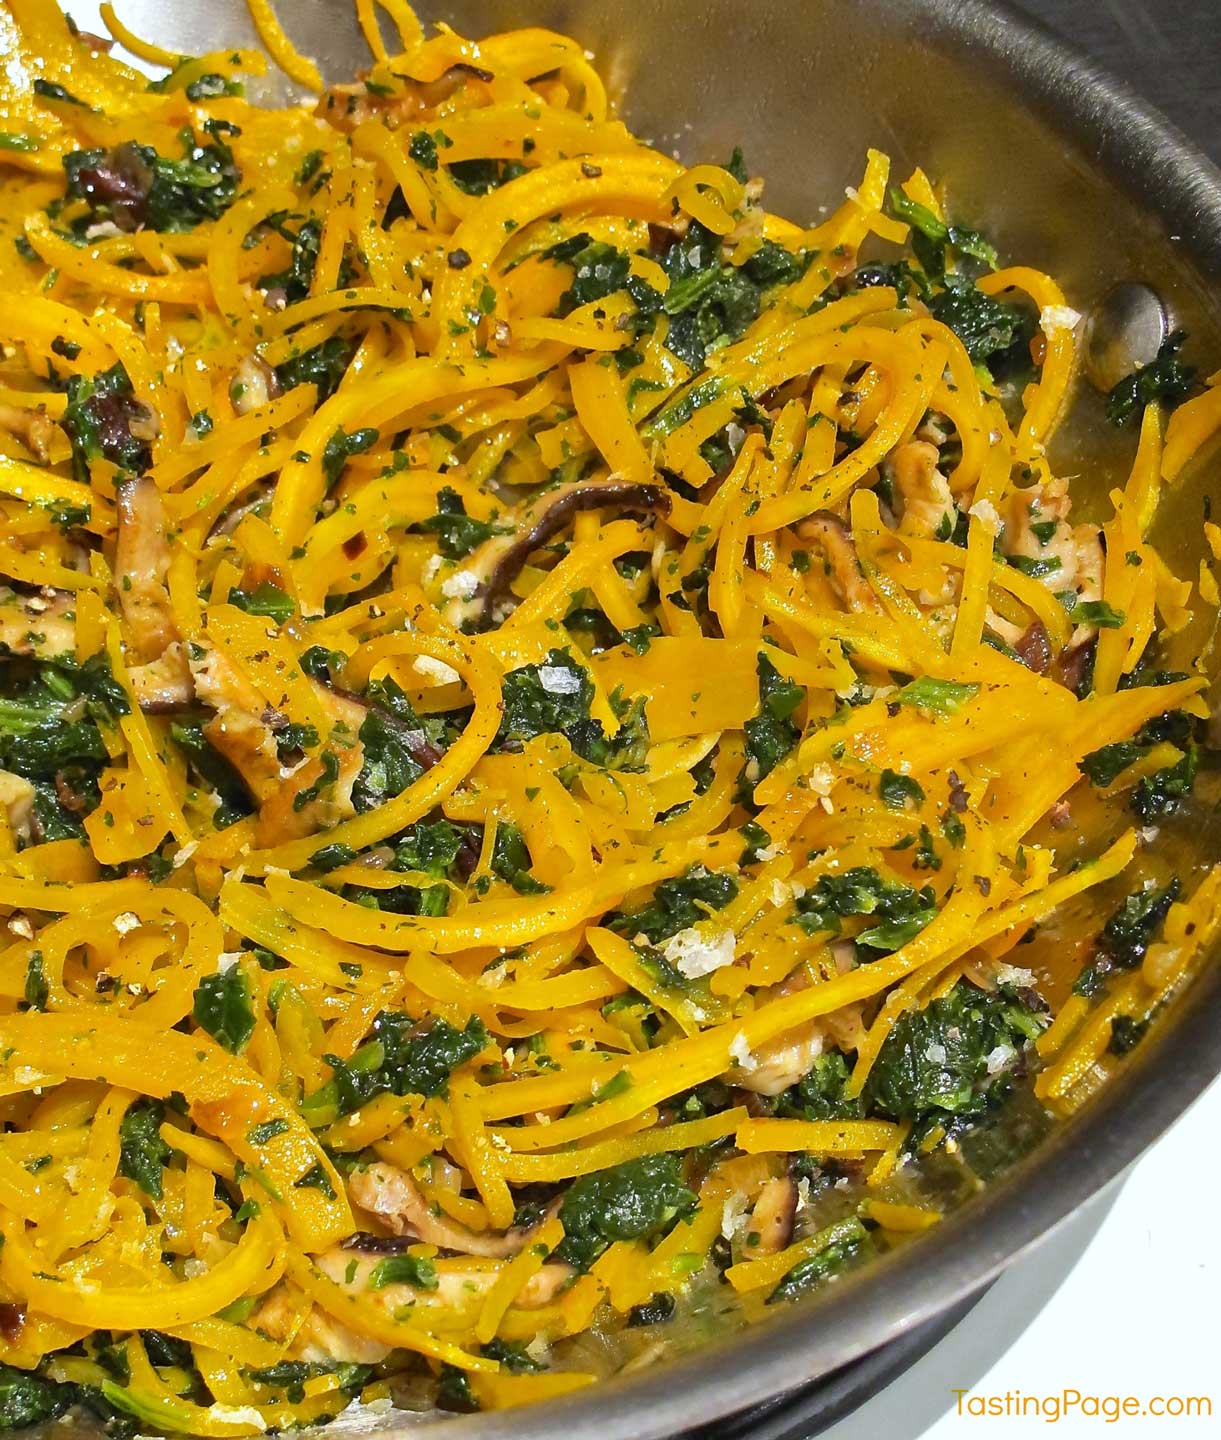 https://twohealthykitchens.com/wp-content/uploads/2018/04/Veggie-Spiralizer-Recipes-Butternut-Squash-Noodles-with-Spinach-and-Mushrooms.jpg